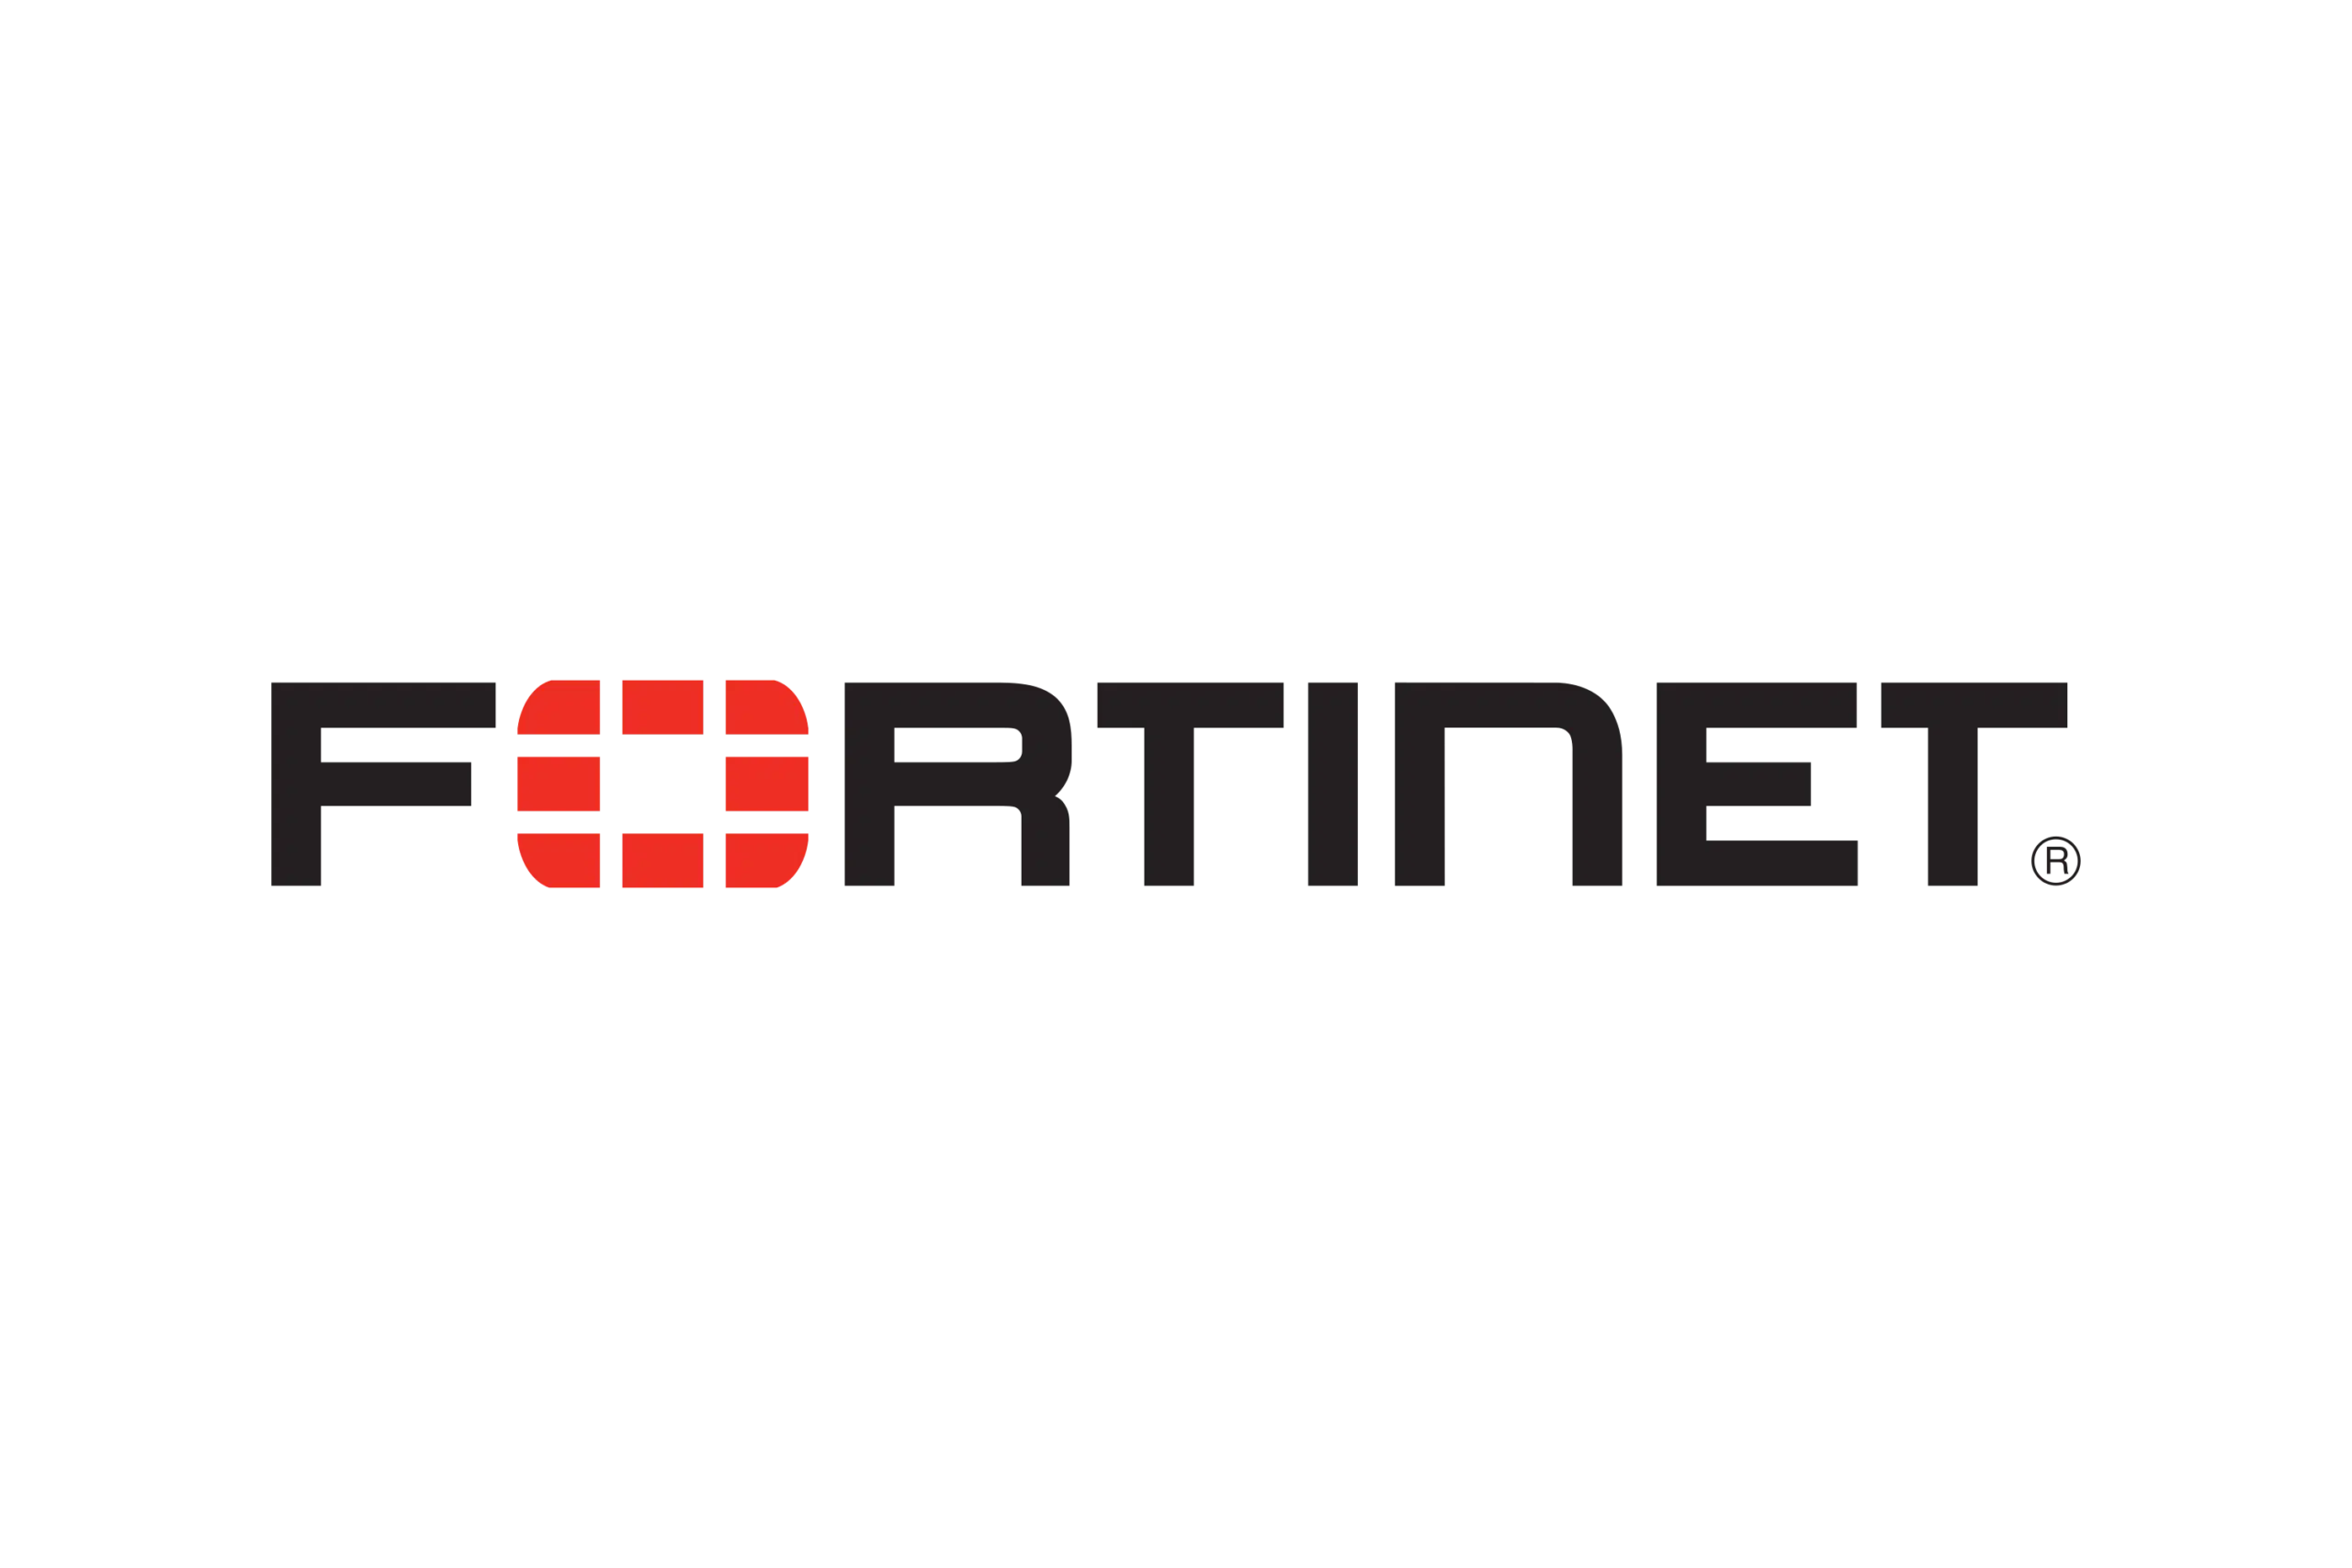 fortinet fortios